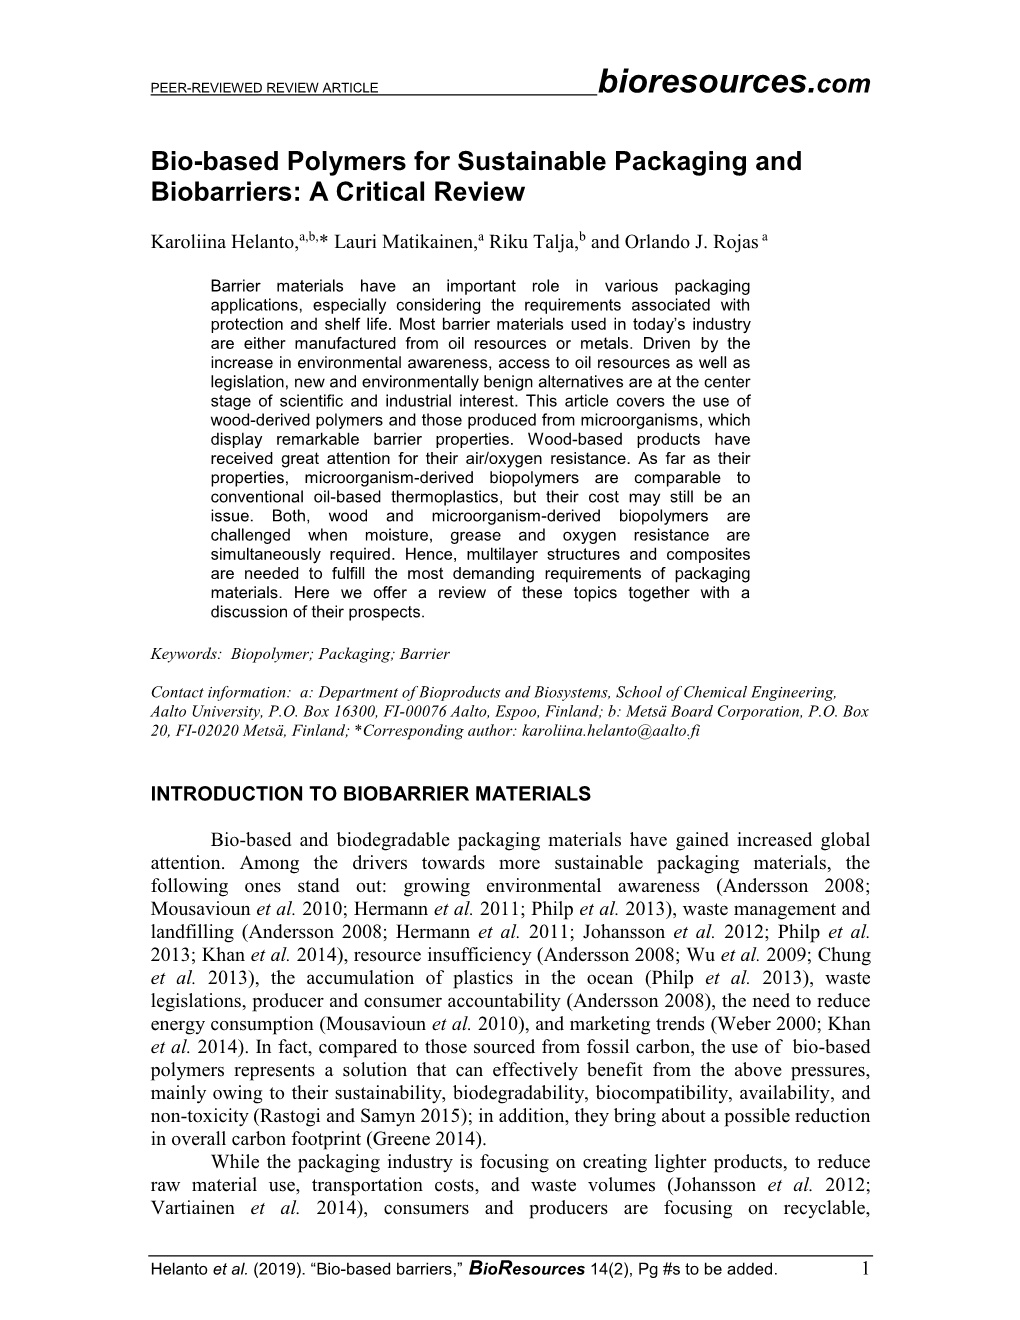 Bio-Based Polymers for Sustainable Packaging and Biobarriers: a Critical Review